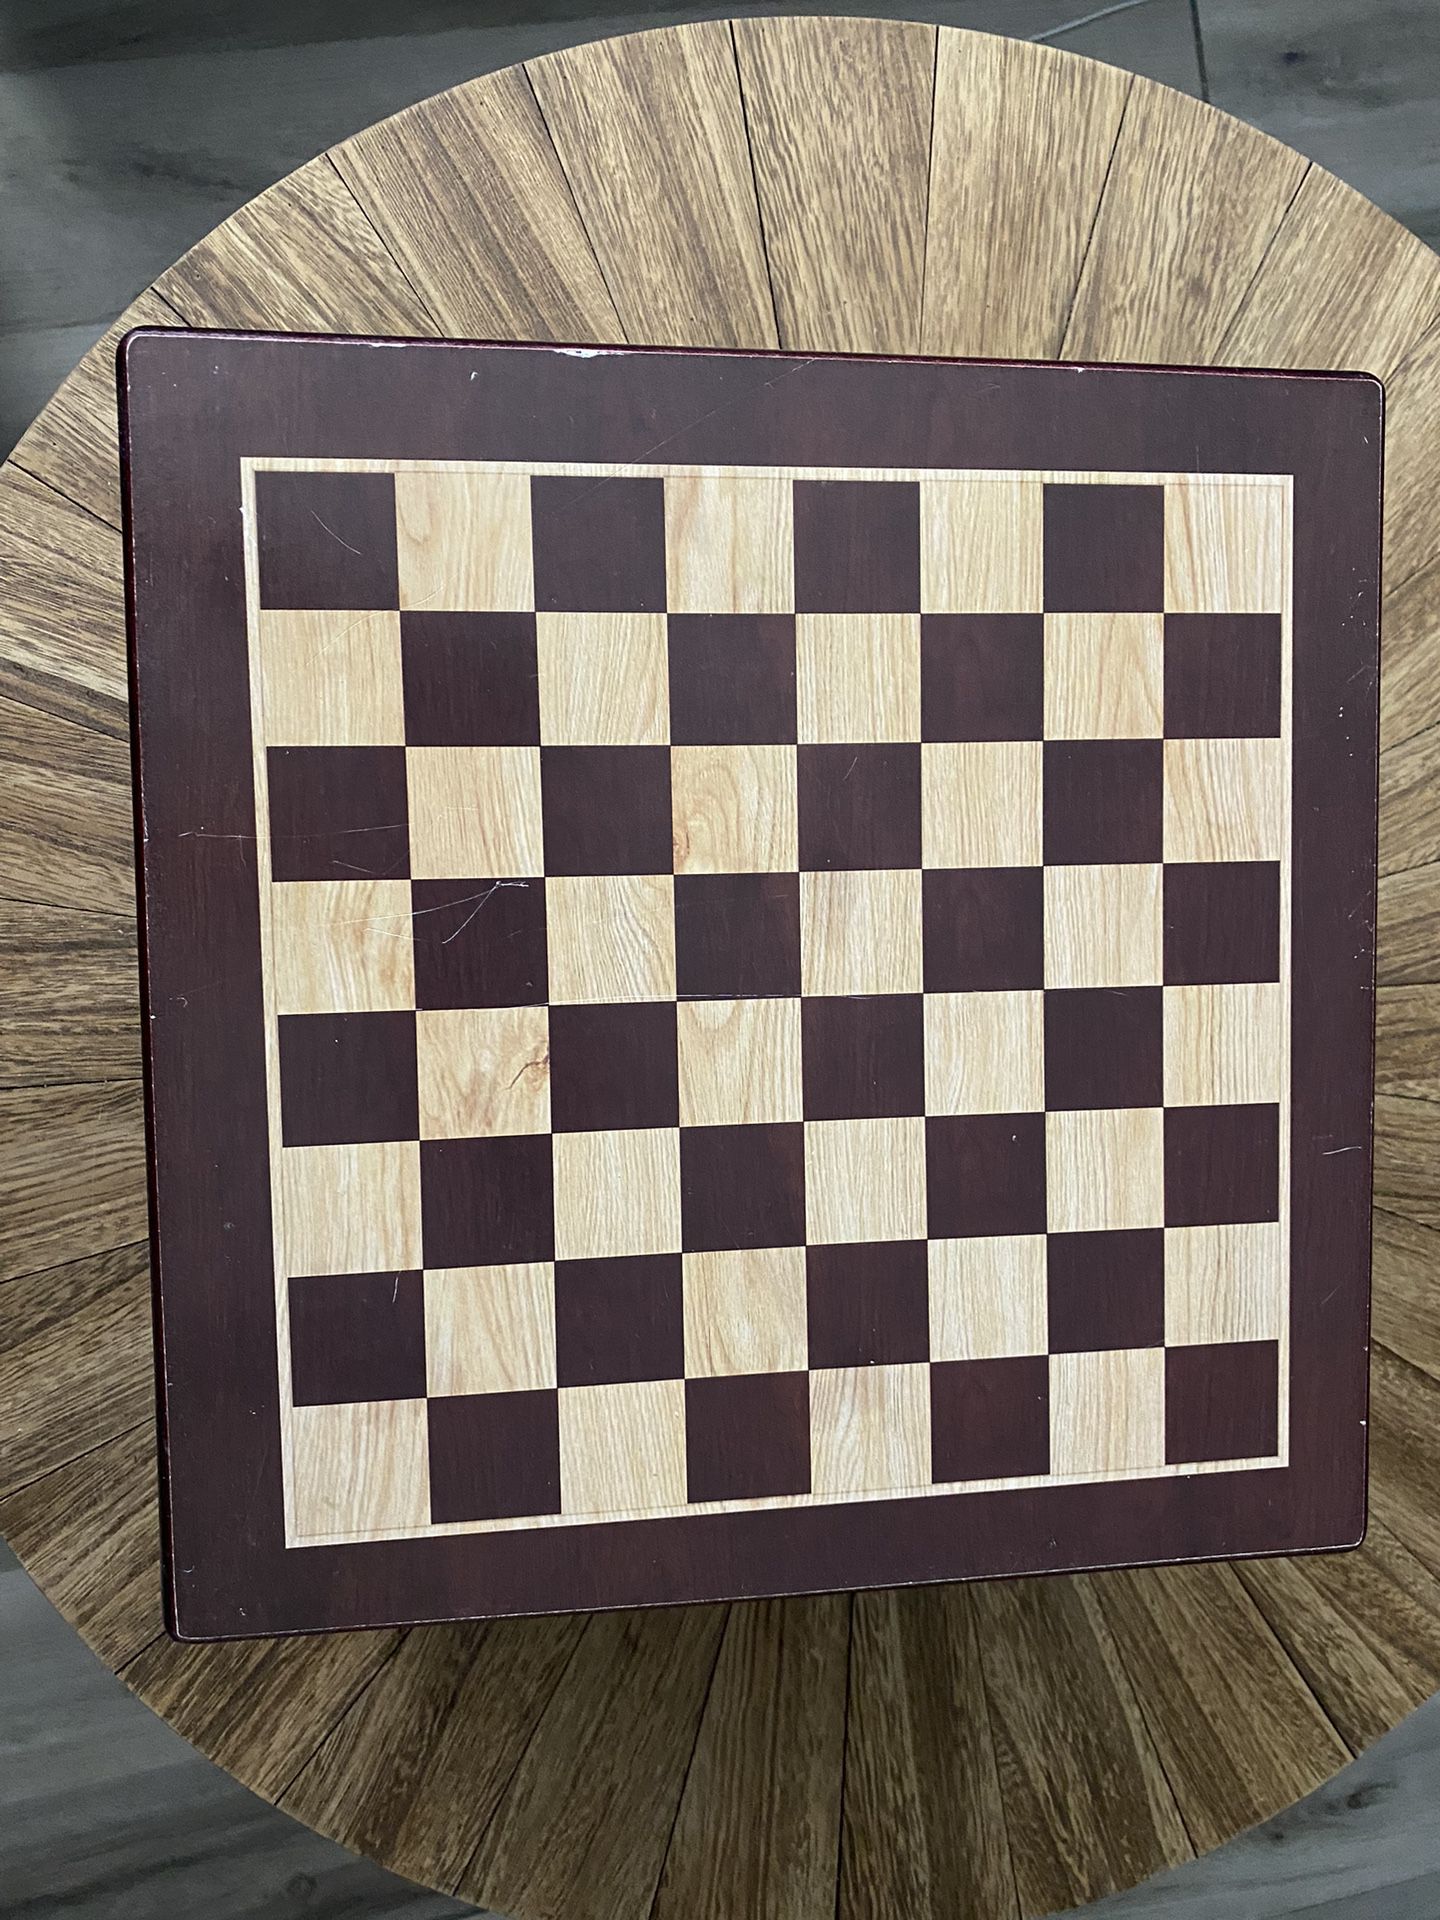 12 in 1 Wooden Game Board Set